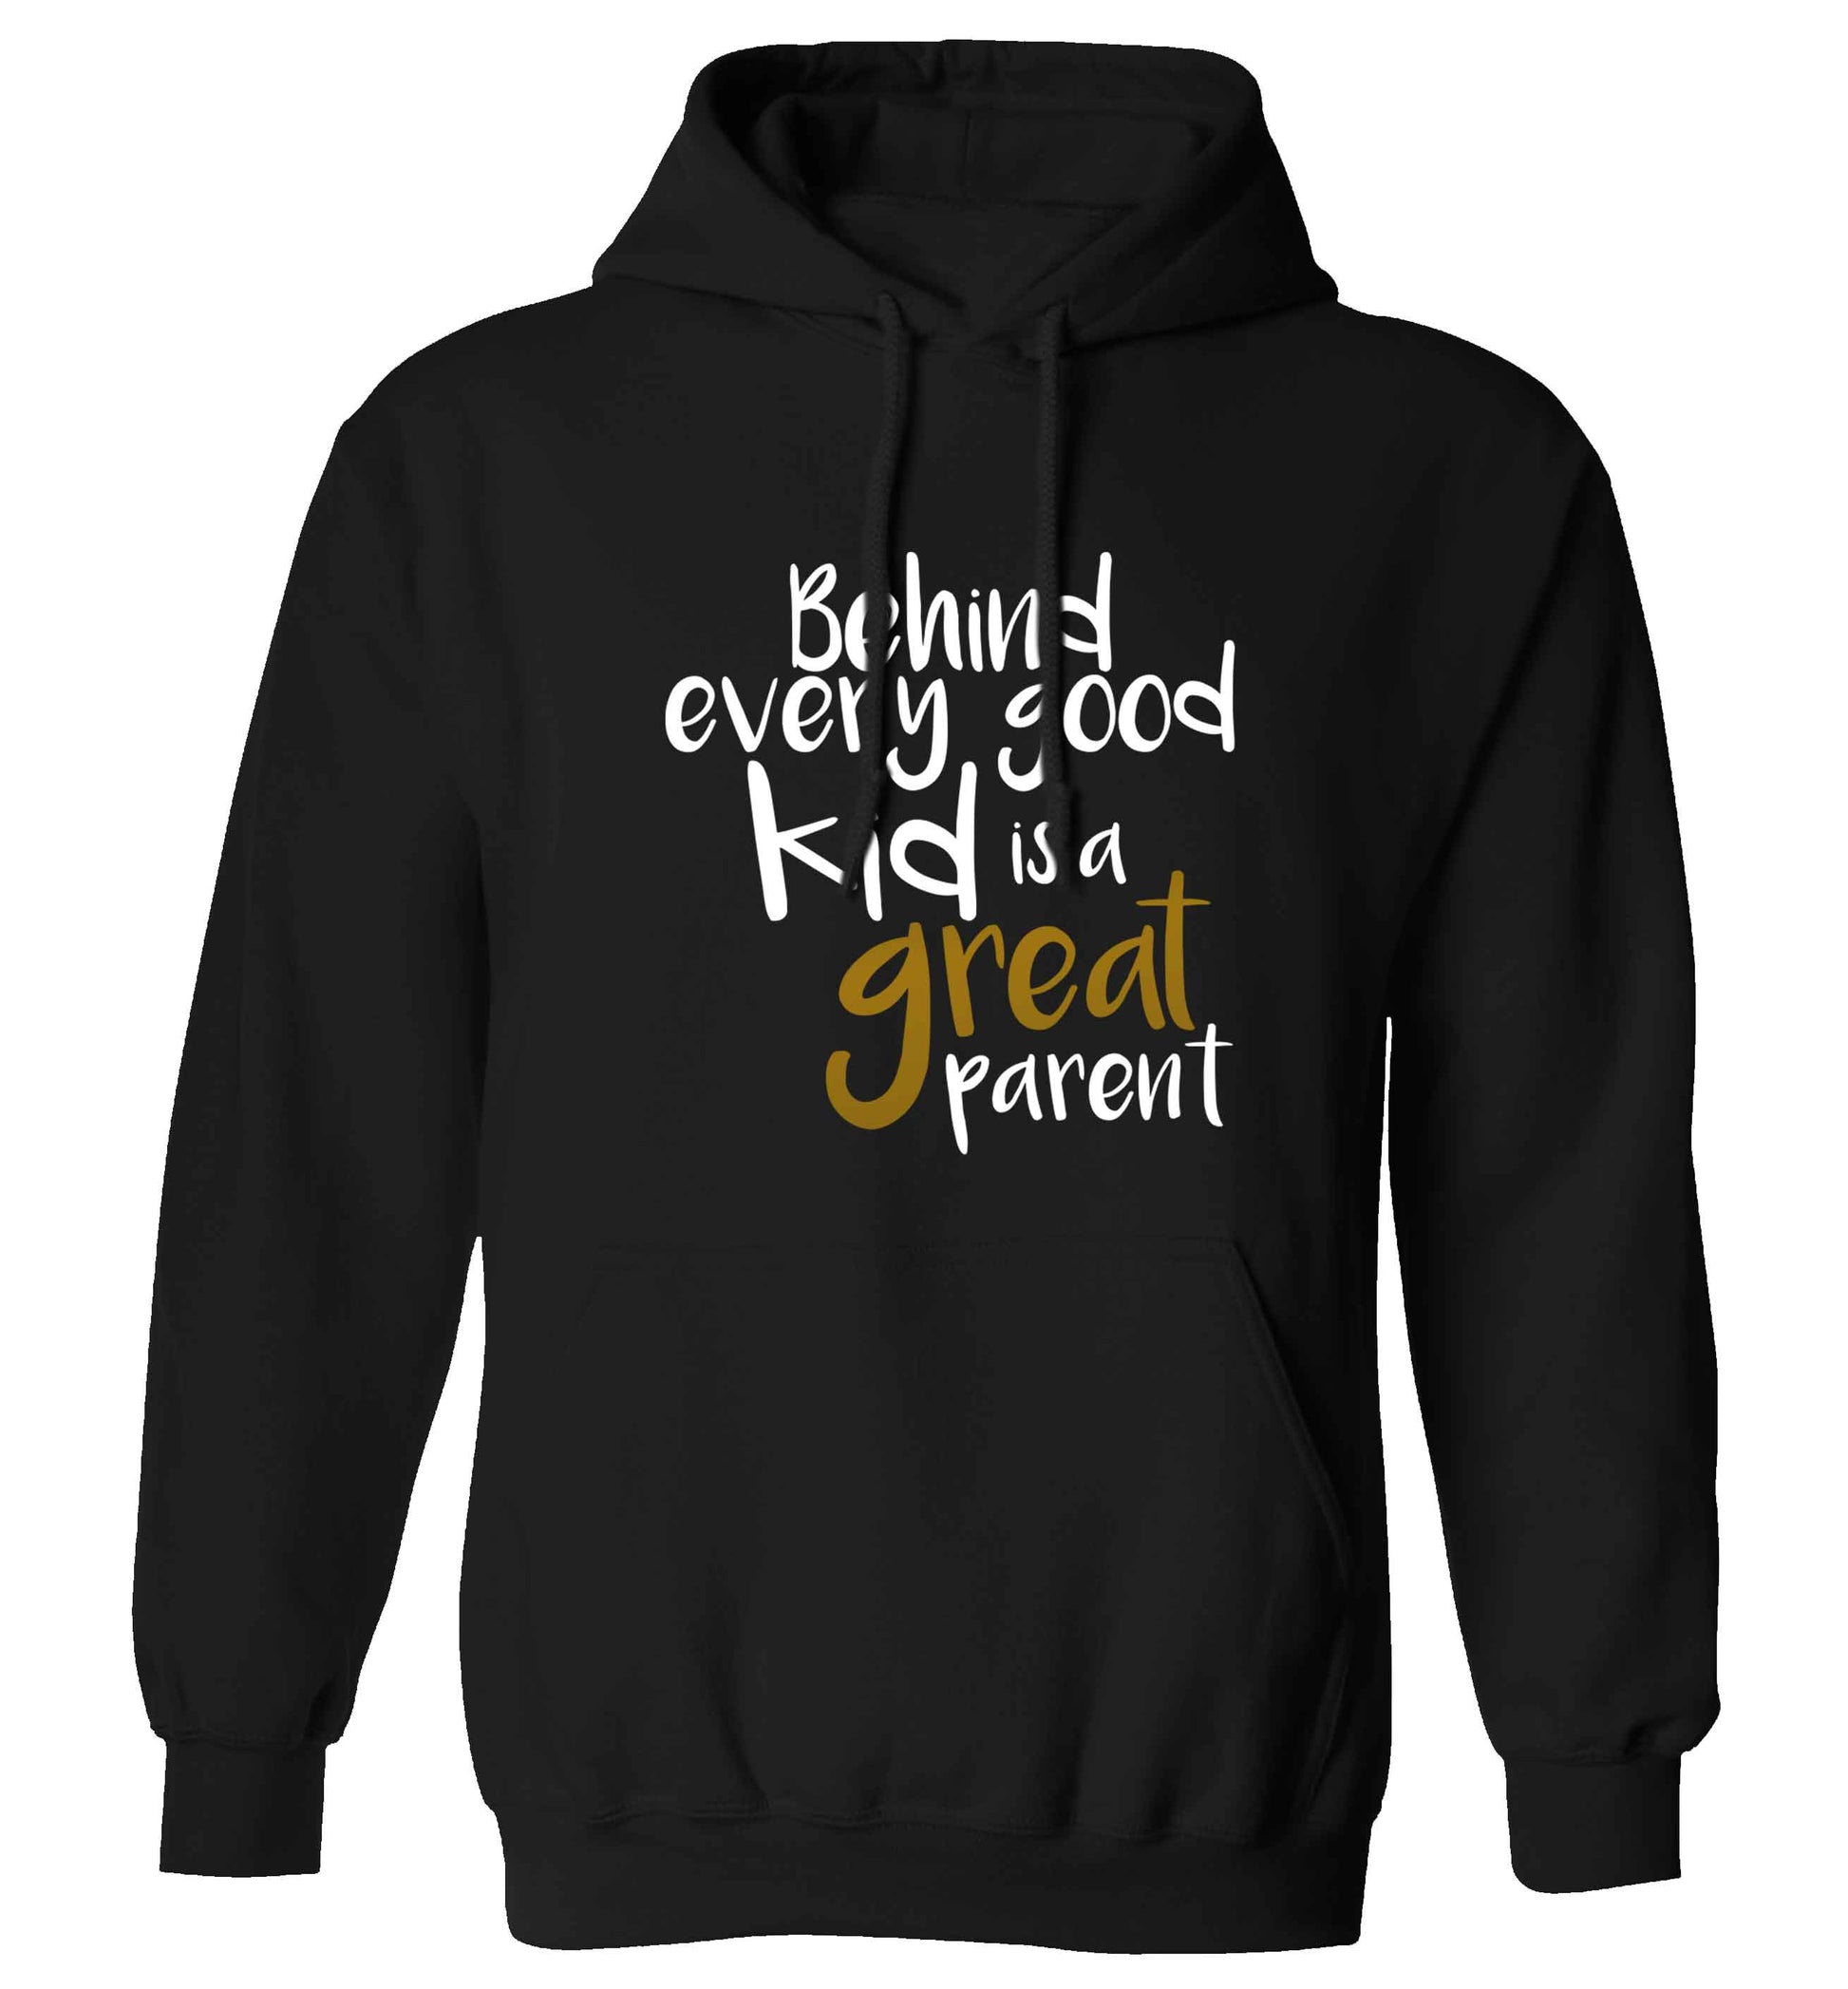 Behind every good kid is a great parent adults unisex black hoodie 2XL